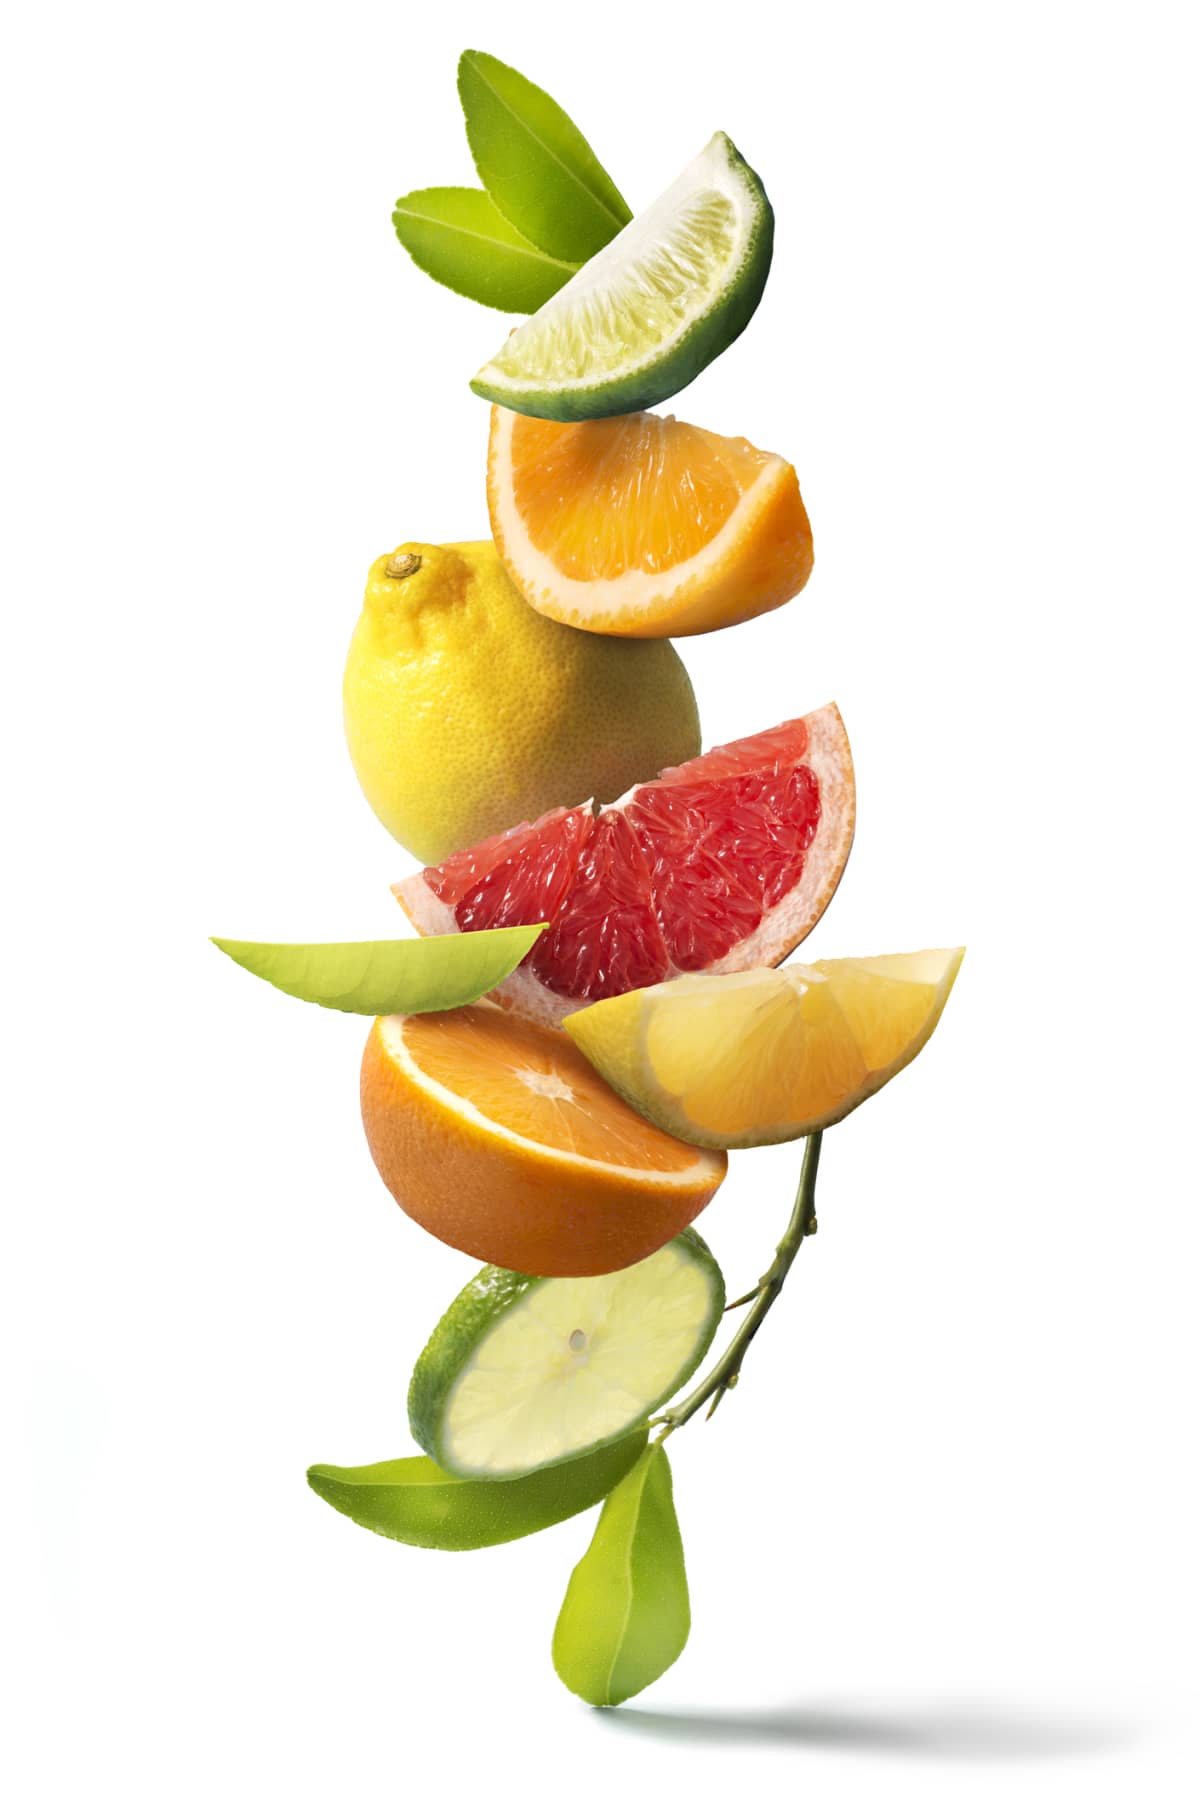 Assorted citrus fruits still life on white background. Close up view.